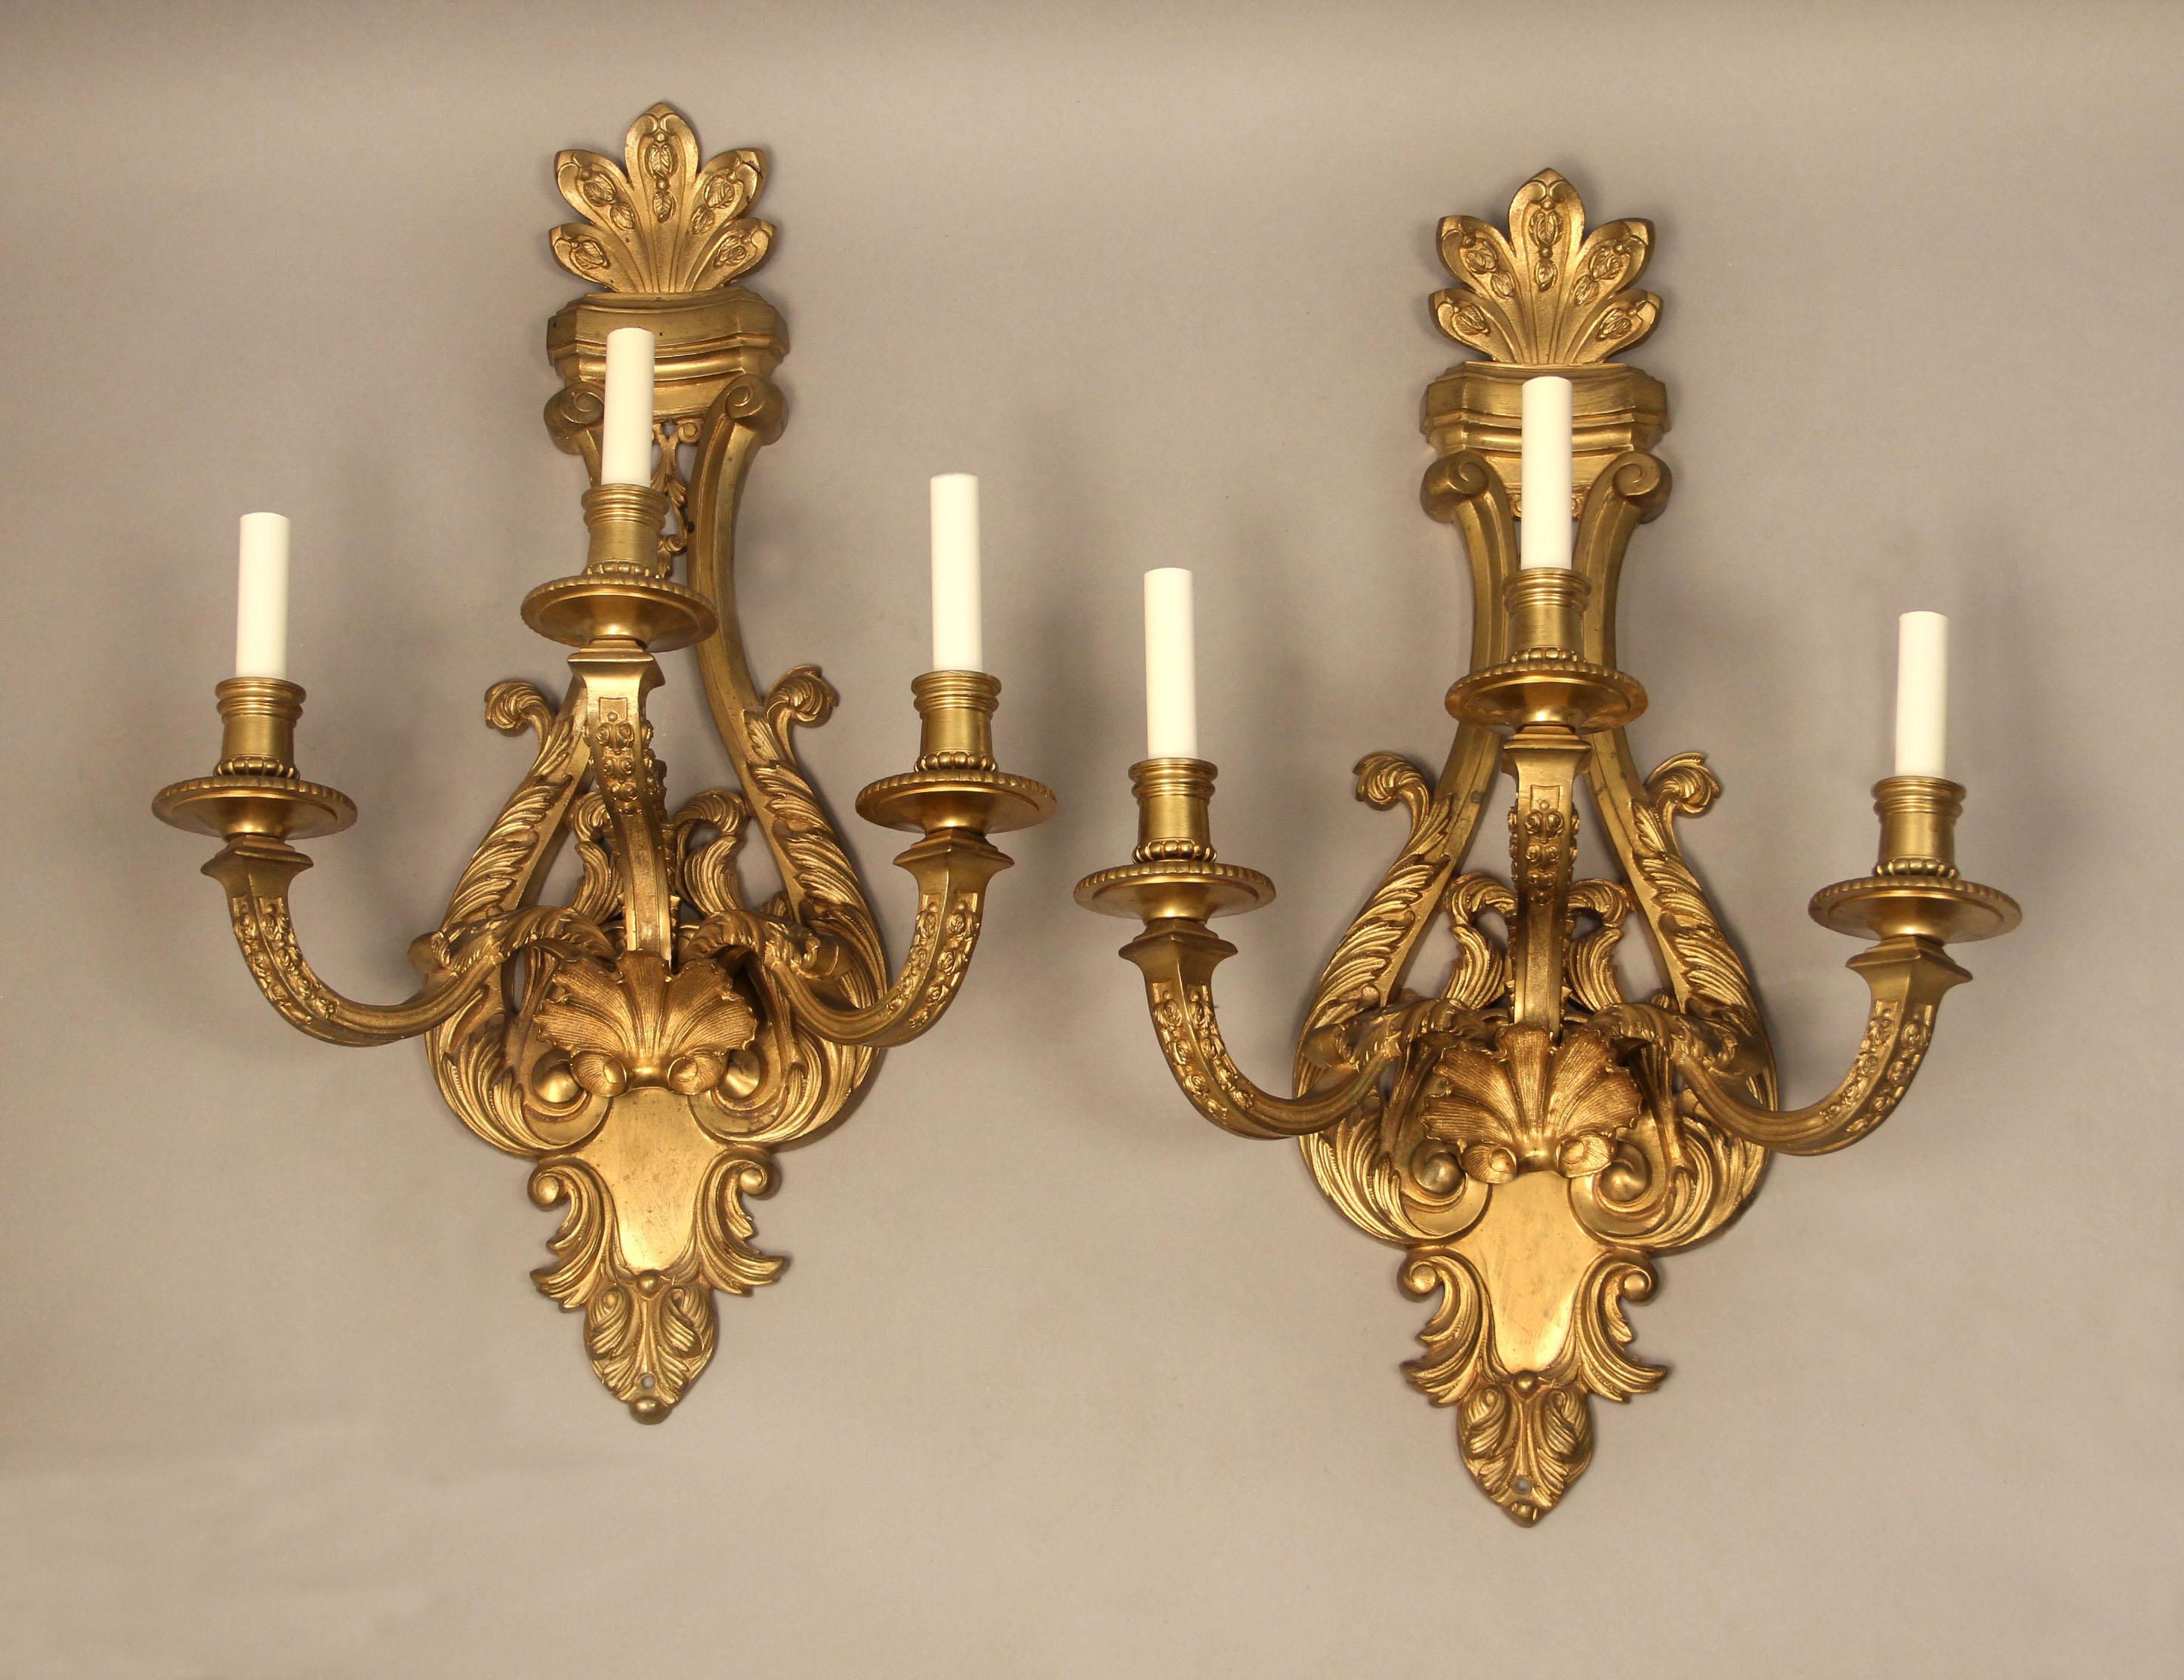 A pair of late 19th century gilt bronze three light sconces

Each backplate decorated with a shell centered below and between the three arms.